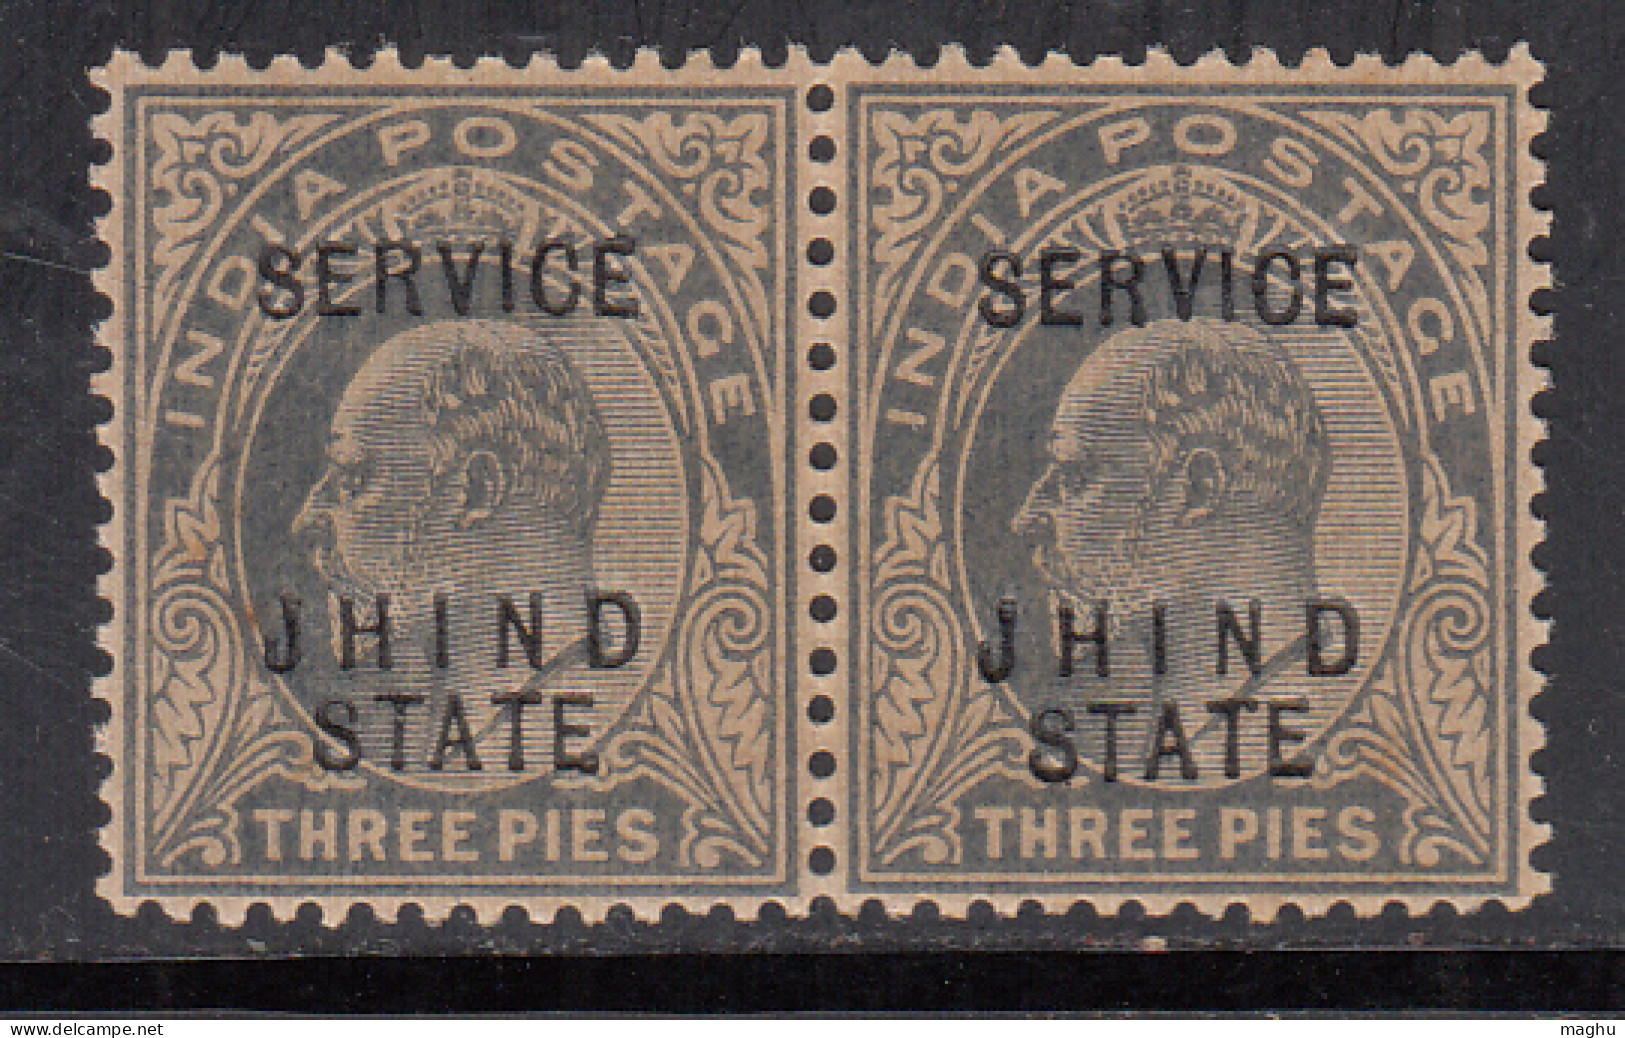 ½a MH Pair Edward, Jhind / Jind State SERVICE, 1903-1906, British India - Jhind